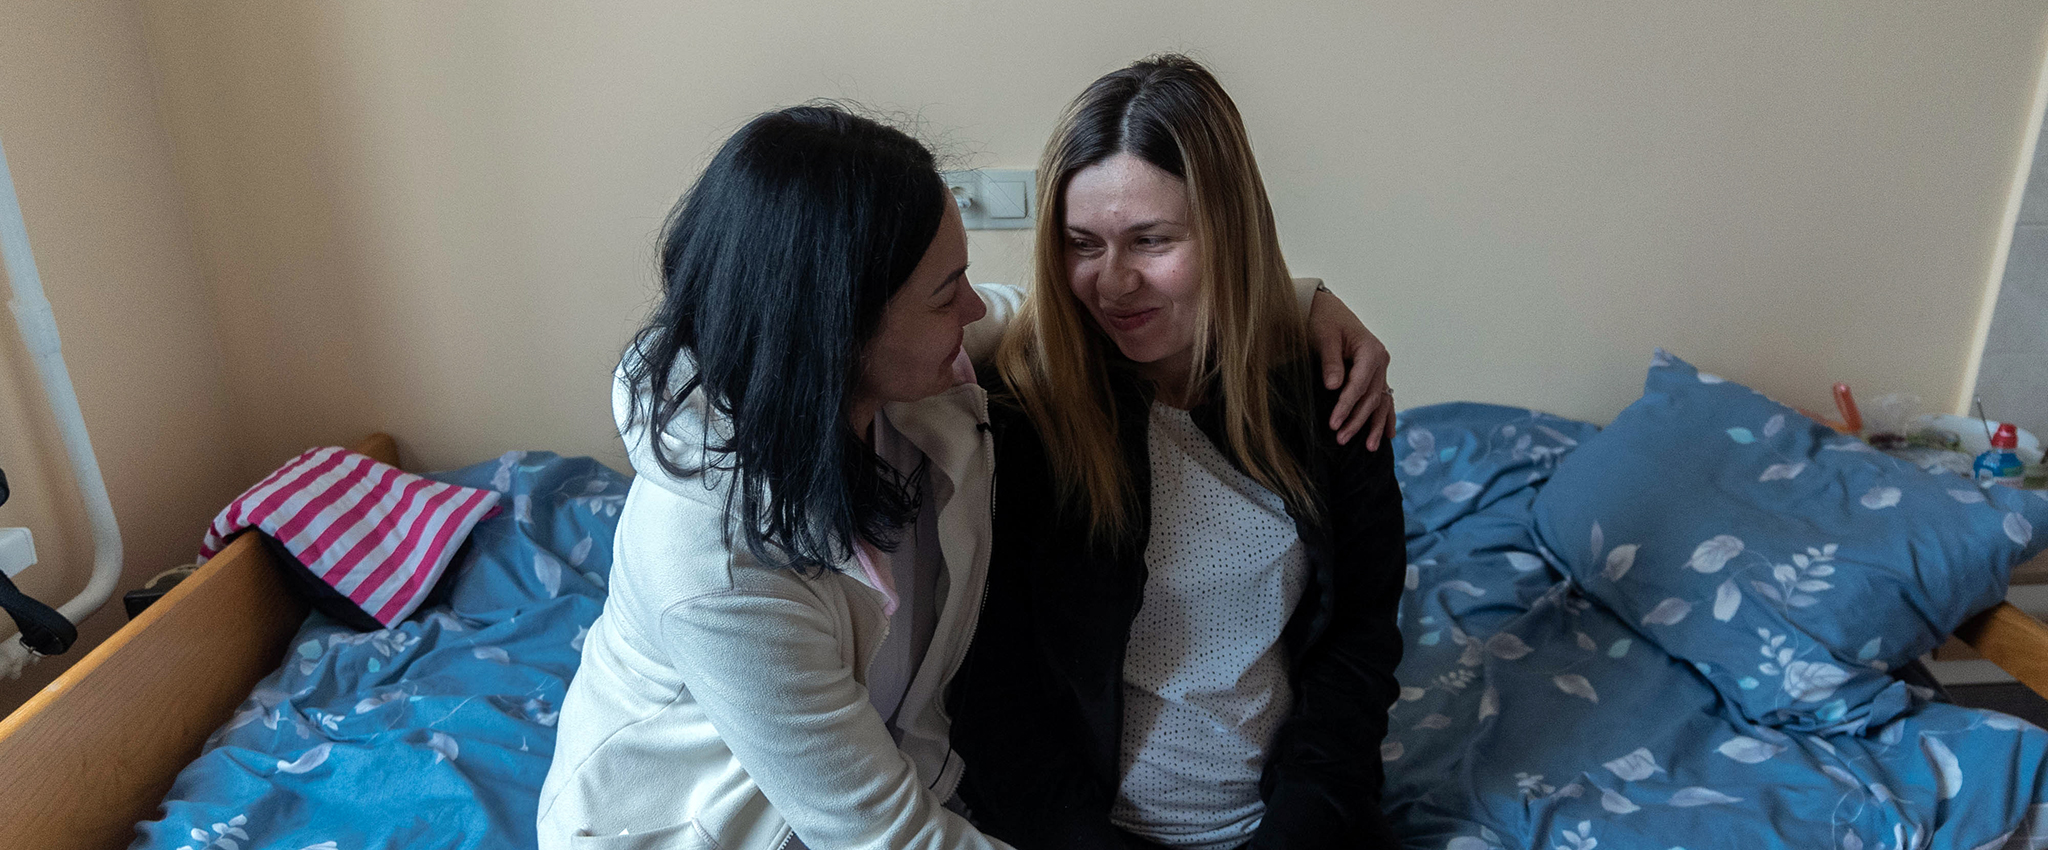 Pregnant women are seen at the Kyiv Maternity Hospital in March 2022.